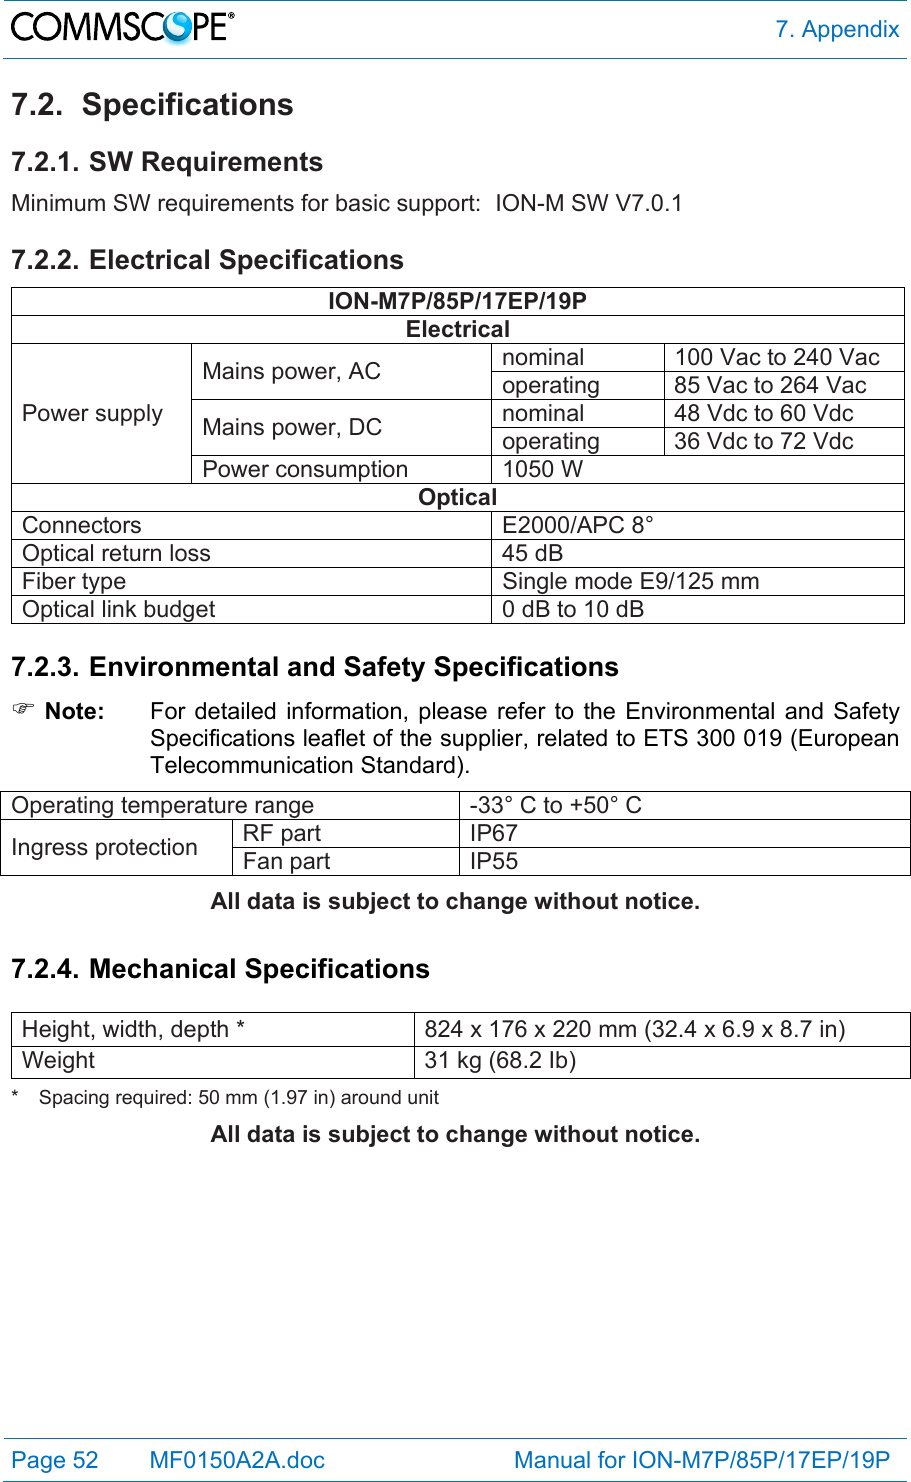  7. Appendix Page 52   MF0150A2A.doc                             Manual for ION-M7P/85P/17EP/19P  7.2. Specifications 7.2.1. SW Requirements Minimum SW requirements for basic support:  ION-M SW V7.0.1   7.2.2. Electrical Specifications ION-M7P/85P/17EP/19P Electrical Power supply Mains power, AC  nominal  100 Vac to 240 Vac operating  85 Vac to 264 Vac Mains power, DC  nominal  48 Vdc to 60 Vdc operating  36 Vdc to 72 Vdc Power consumption  1050 W Optical Connectors E2000/APC 8° Optical return loss  45 dB Fiber type  Single mode E9/125 mm  Optical link budget  0 dB to 10 dB  7.2.3. Environmental and Safety Specifications   Note:  For detailed information, please refer to the Environmental and Safety Specifications leaflet of the supplier, related to ETS 300 019 (European Telecommunication Standard). Operating temperature range  -33° C to +50° C  Ingress protection  RF part  IP67Fan part  IP55 All data is subject to change without notice.  7.2.4. Mechanical Specifications  Height, width, depth *  824 x 176 x 220 mm (32.4 x 6.9 x 8.7 in) Weight  31 kg (68.2 Ib) *   Spacing required: 50 mm (1.97 in) around unit All data is subject to change without notice. 